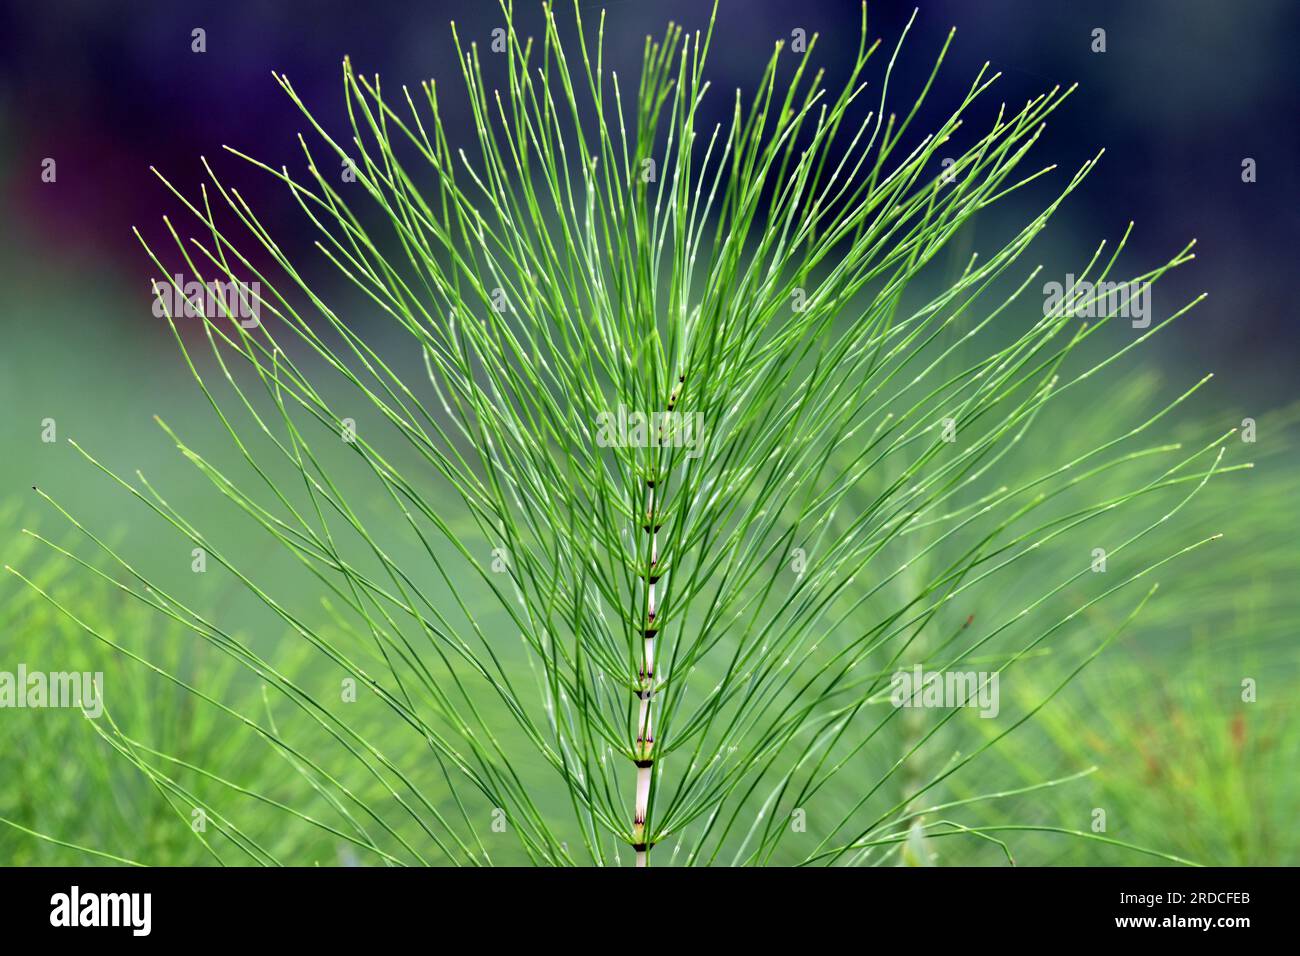 Detail of a horsetail plant (Equisetum telmateia) on a somewhat dark background. Stock Photo